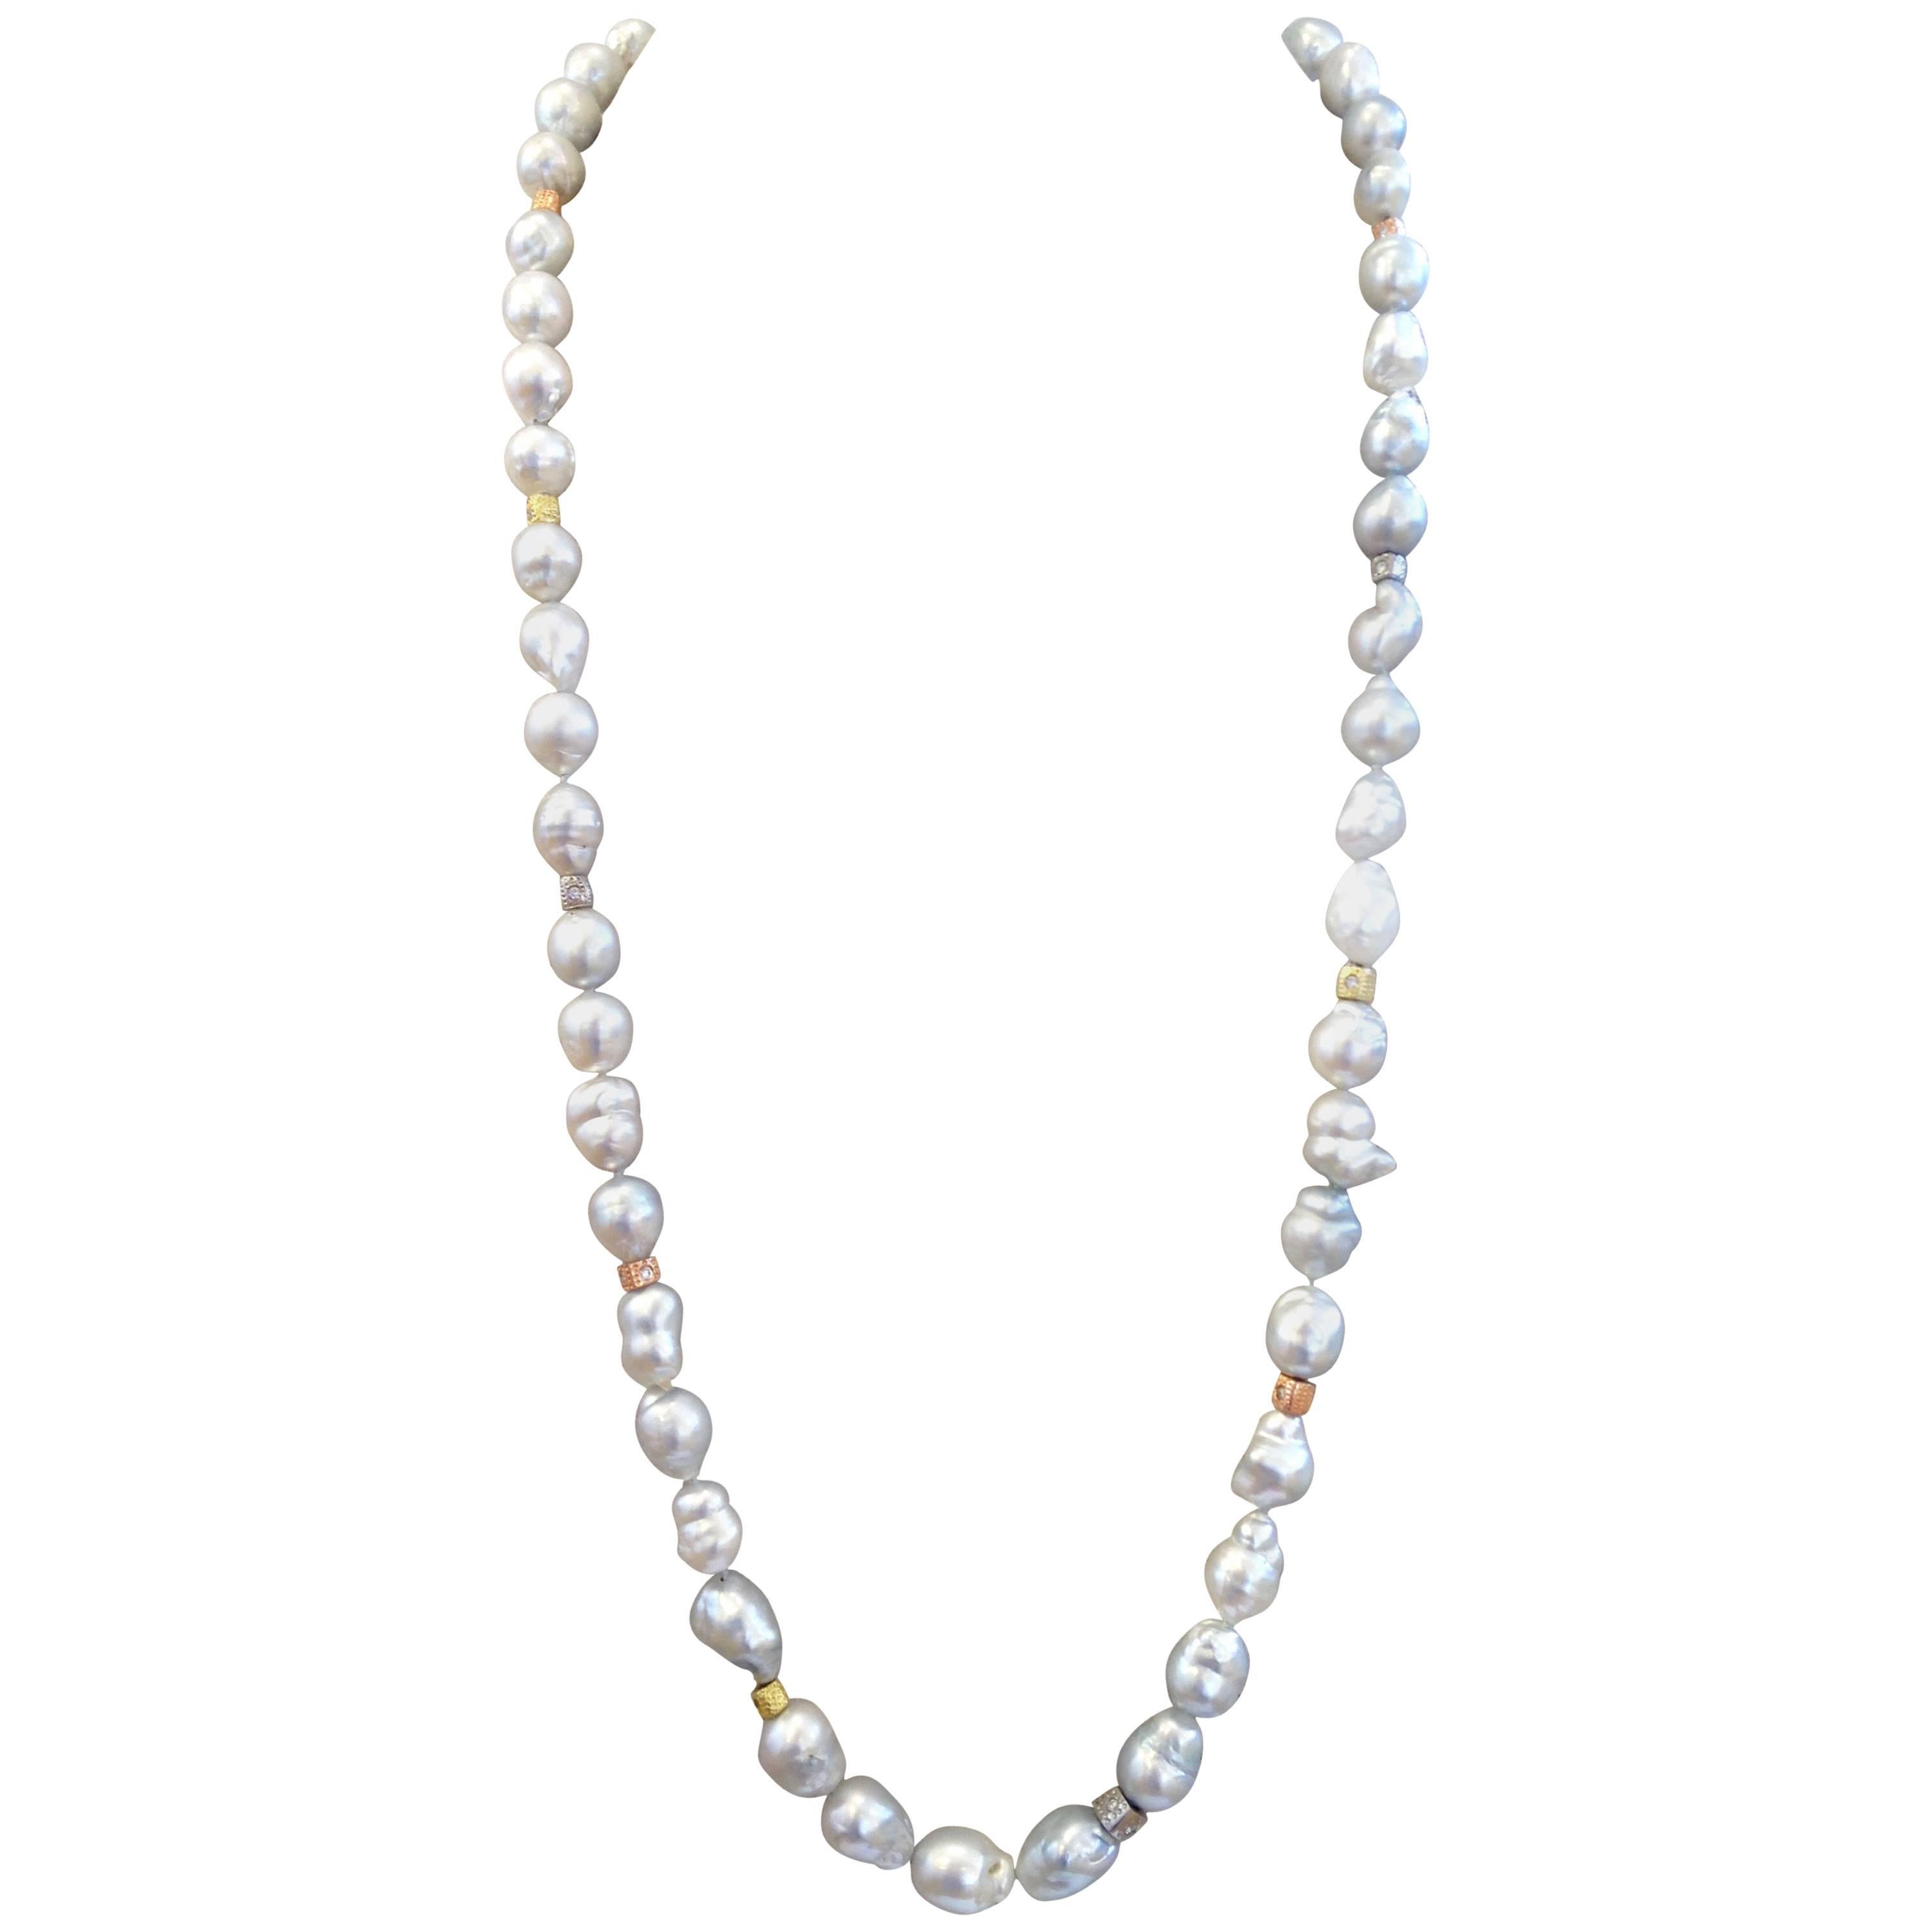 Silver-White Baroque Pearl Necklace with Diamond and Gold Beads